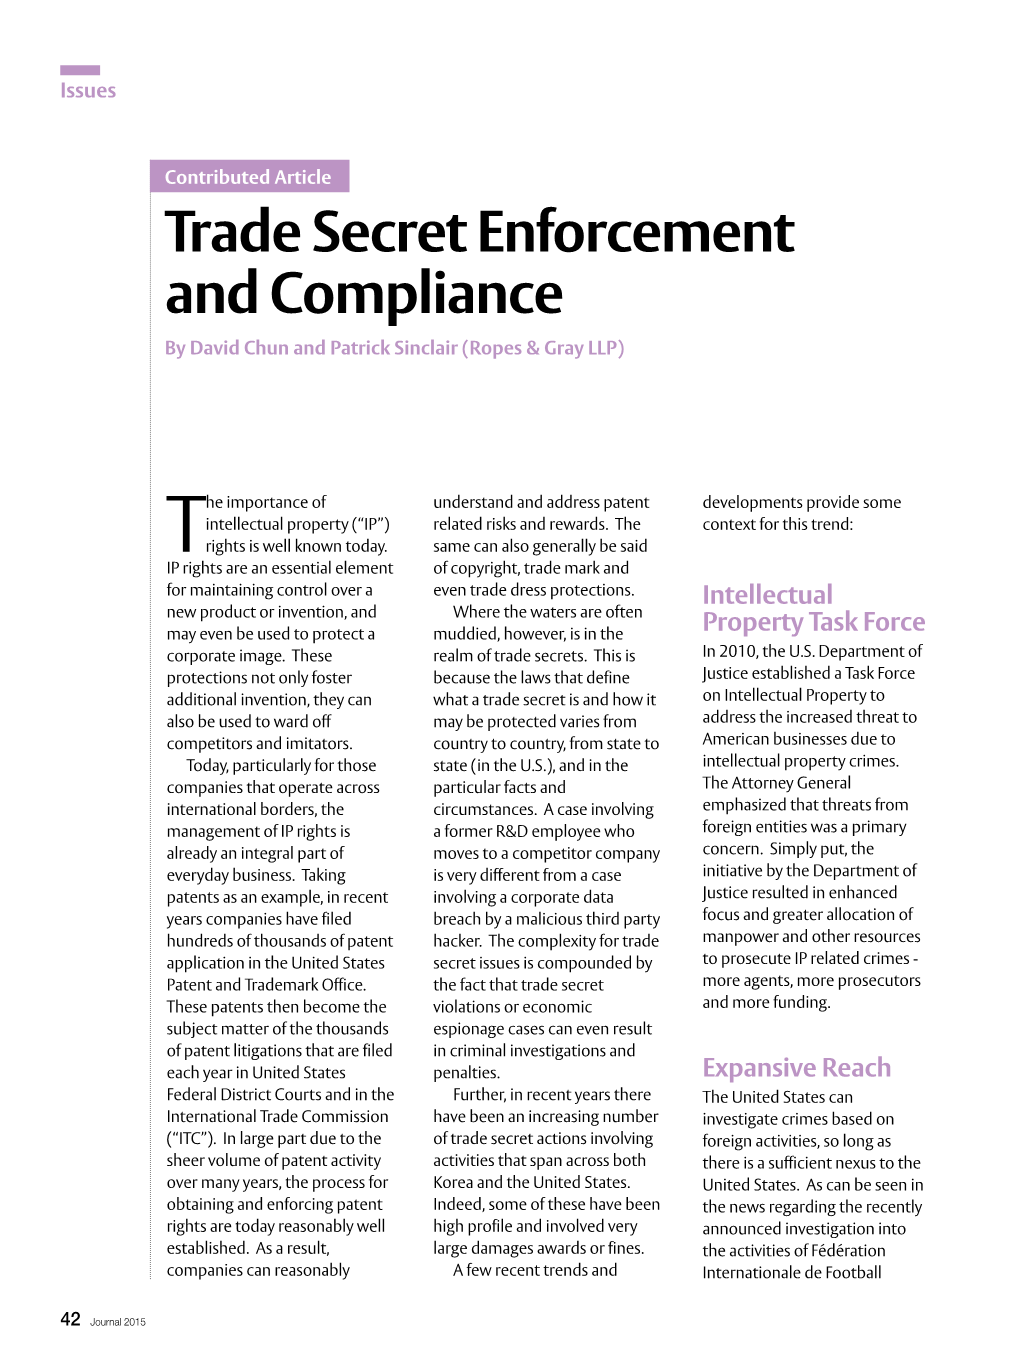 Trade Secret Enforcement and Compliance by David Chun and Patrick Sinclair (Ropes & Gray LLP)